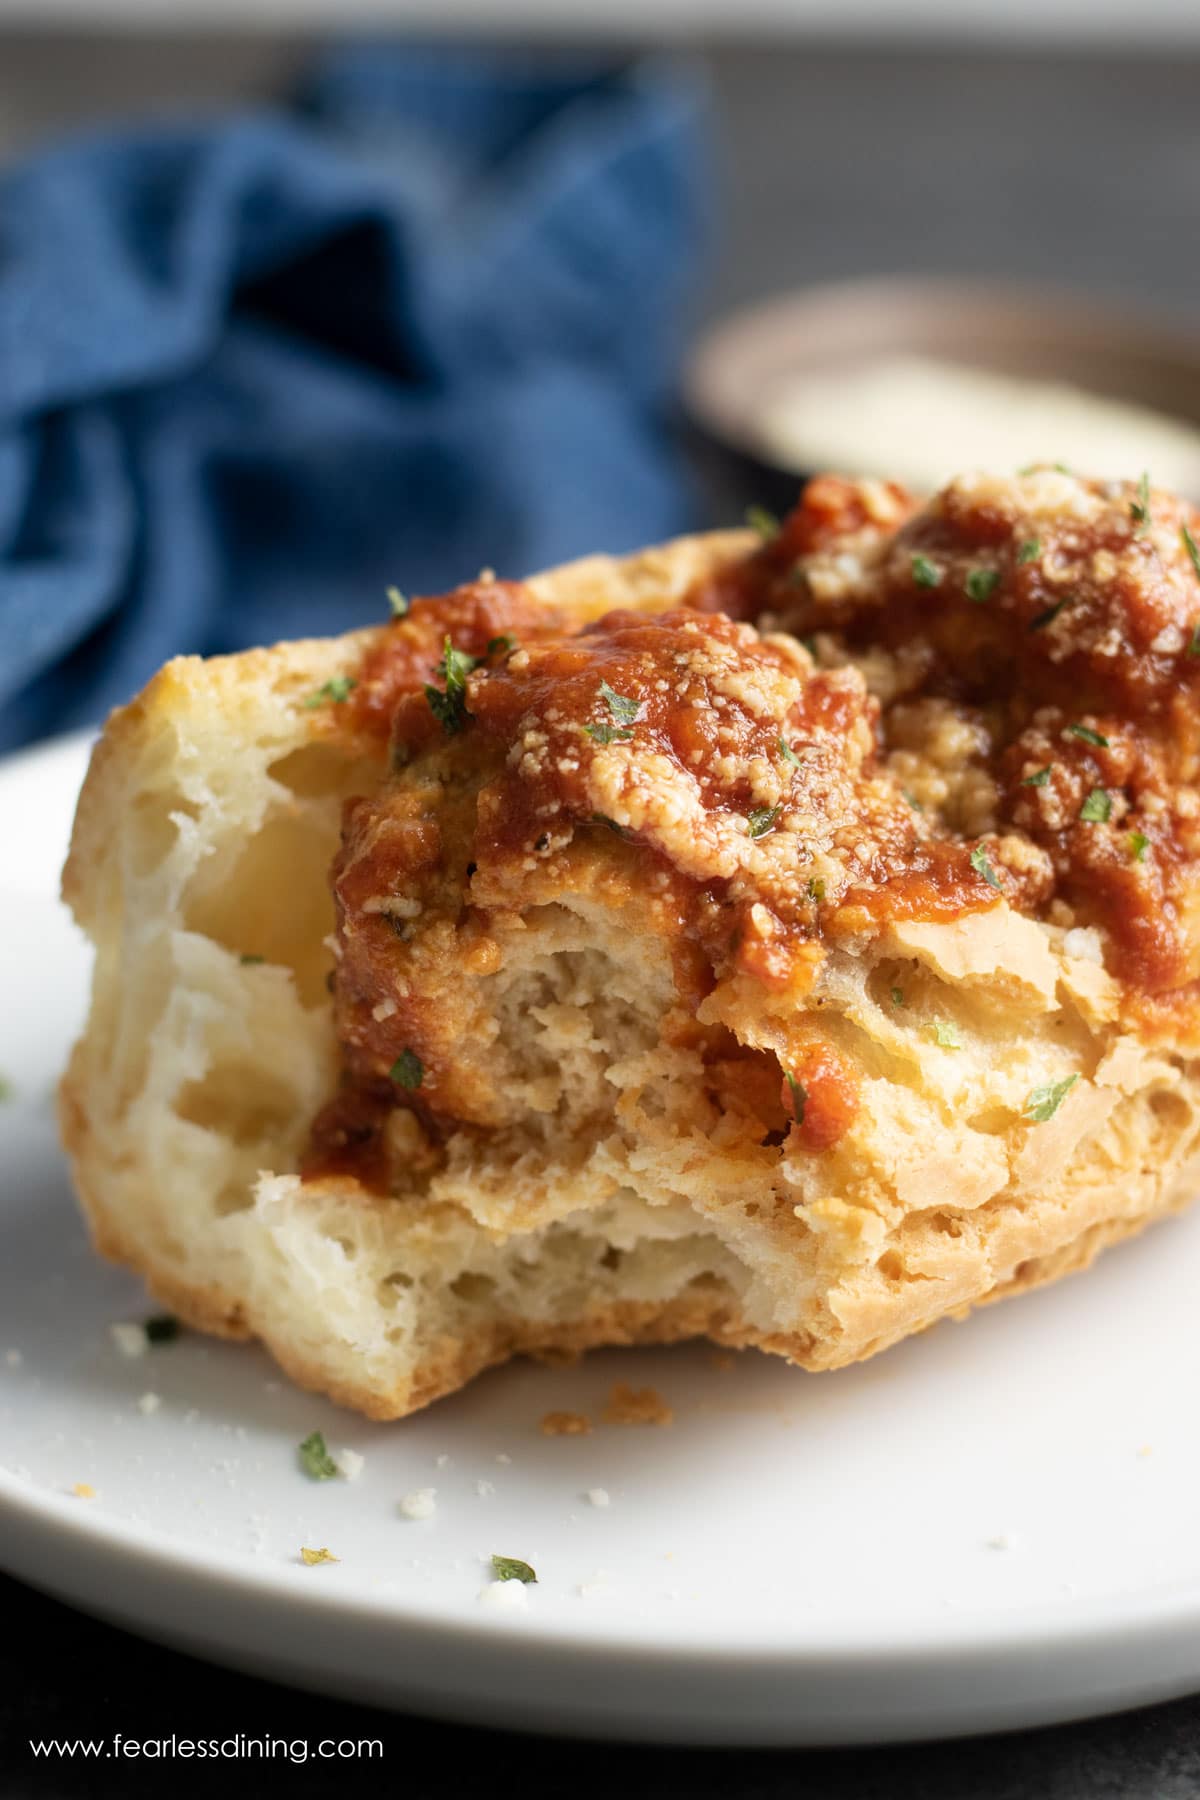 A ground pork meatball grinder with a bite taken out so you can see inside the meatball.